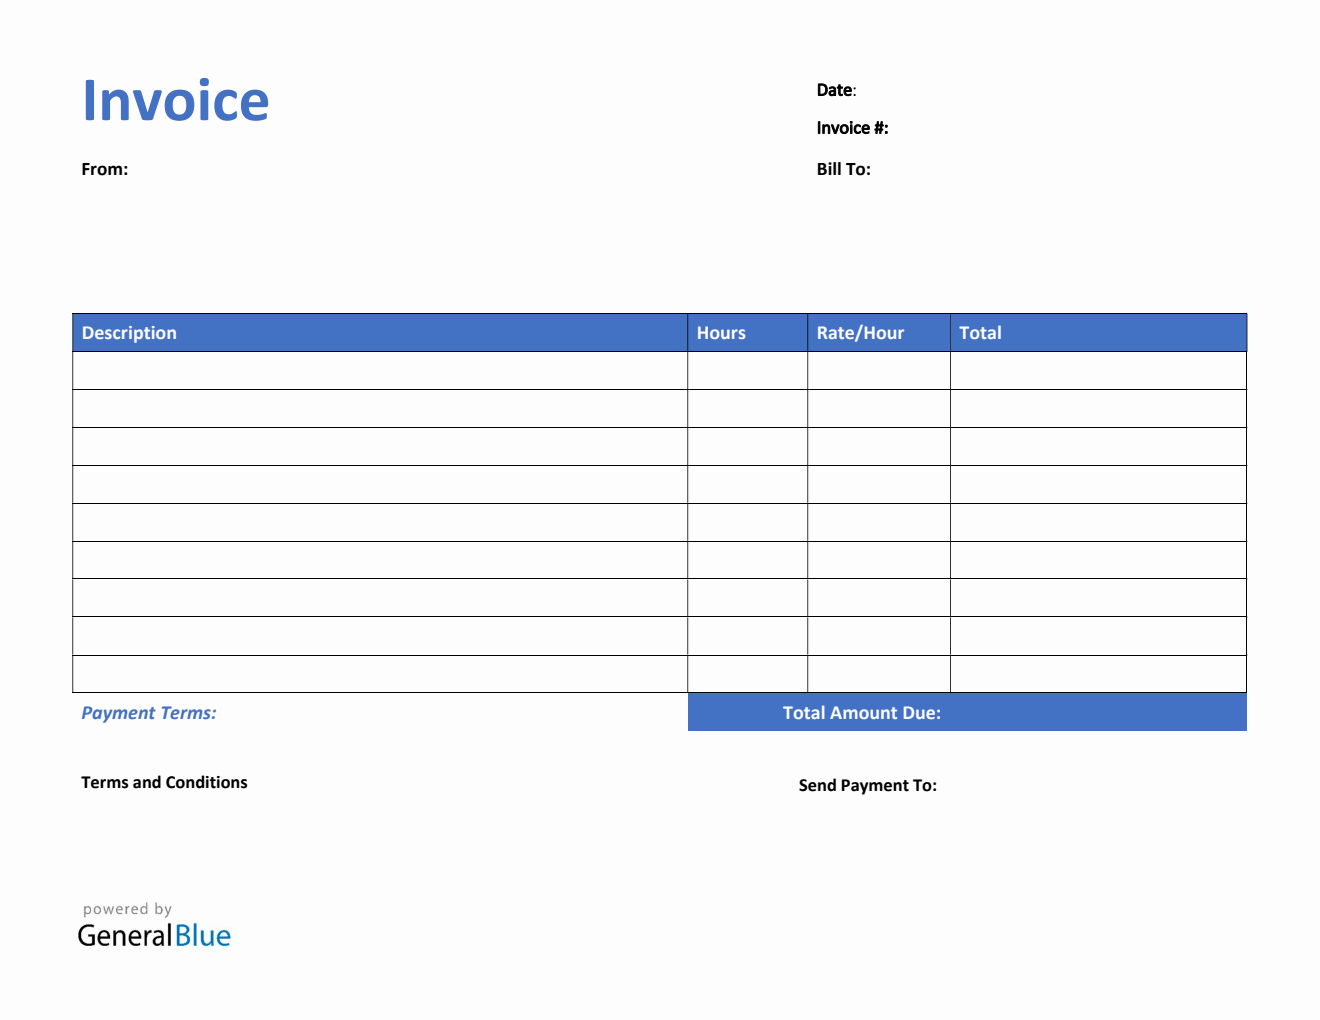 Invoice Template for U.S. Freelancers in PDF (Highlighted)